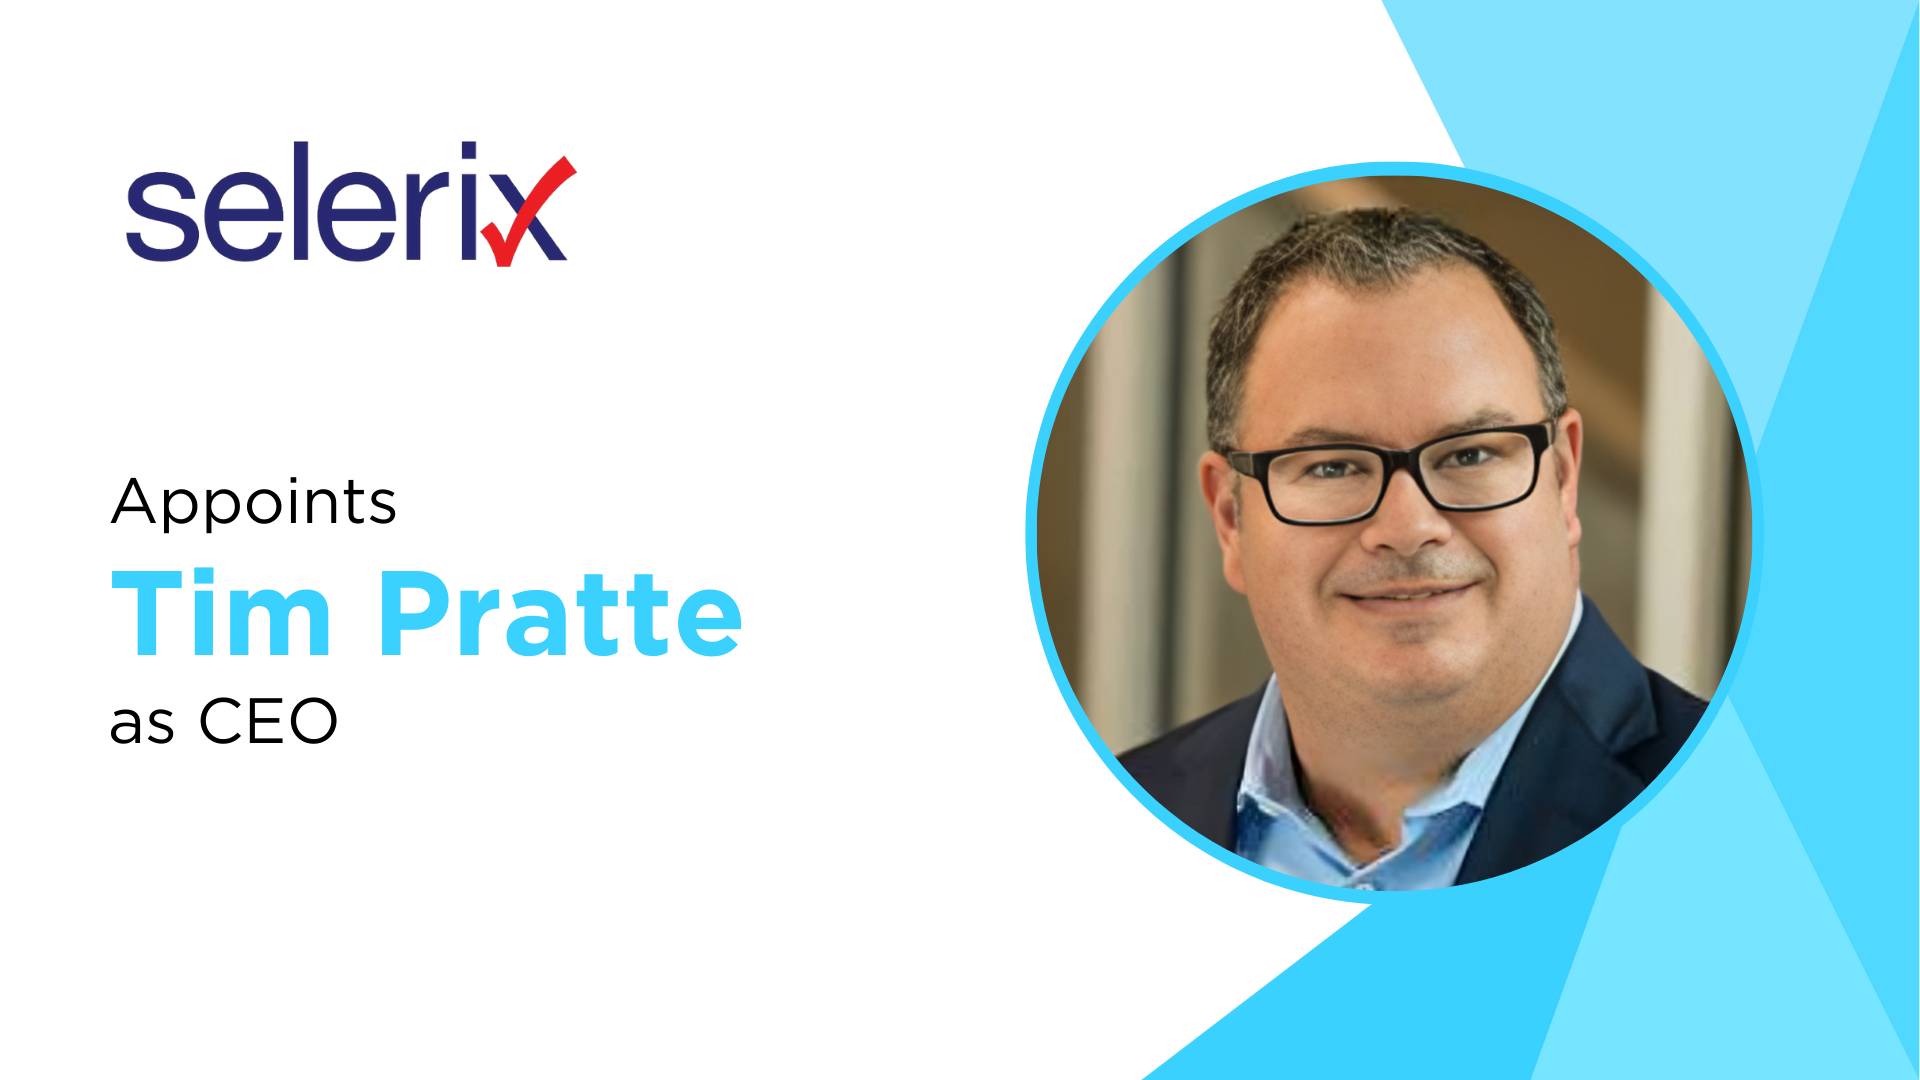 Selerix Appoints Tim Pratte as New CEO: A Visionary Leader in Benefits Administration